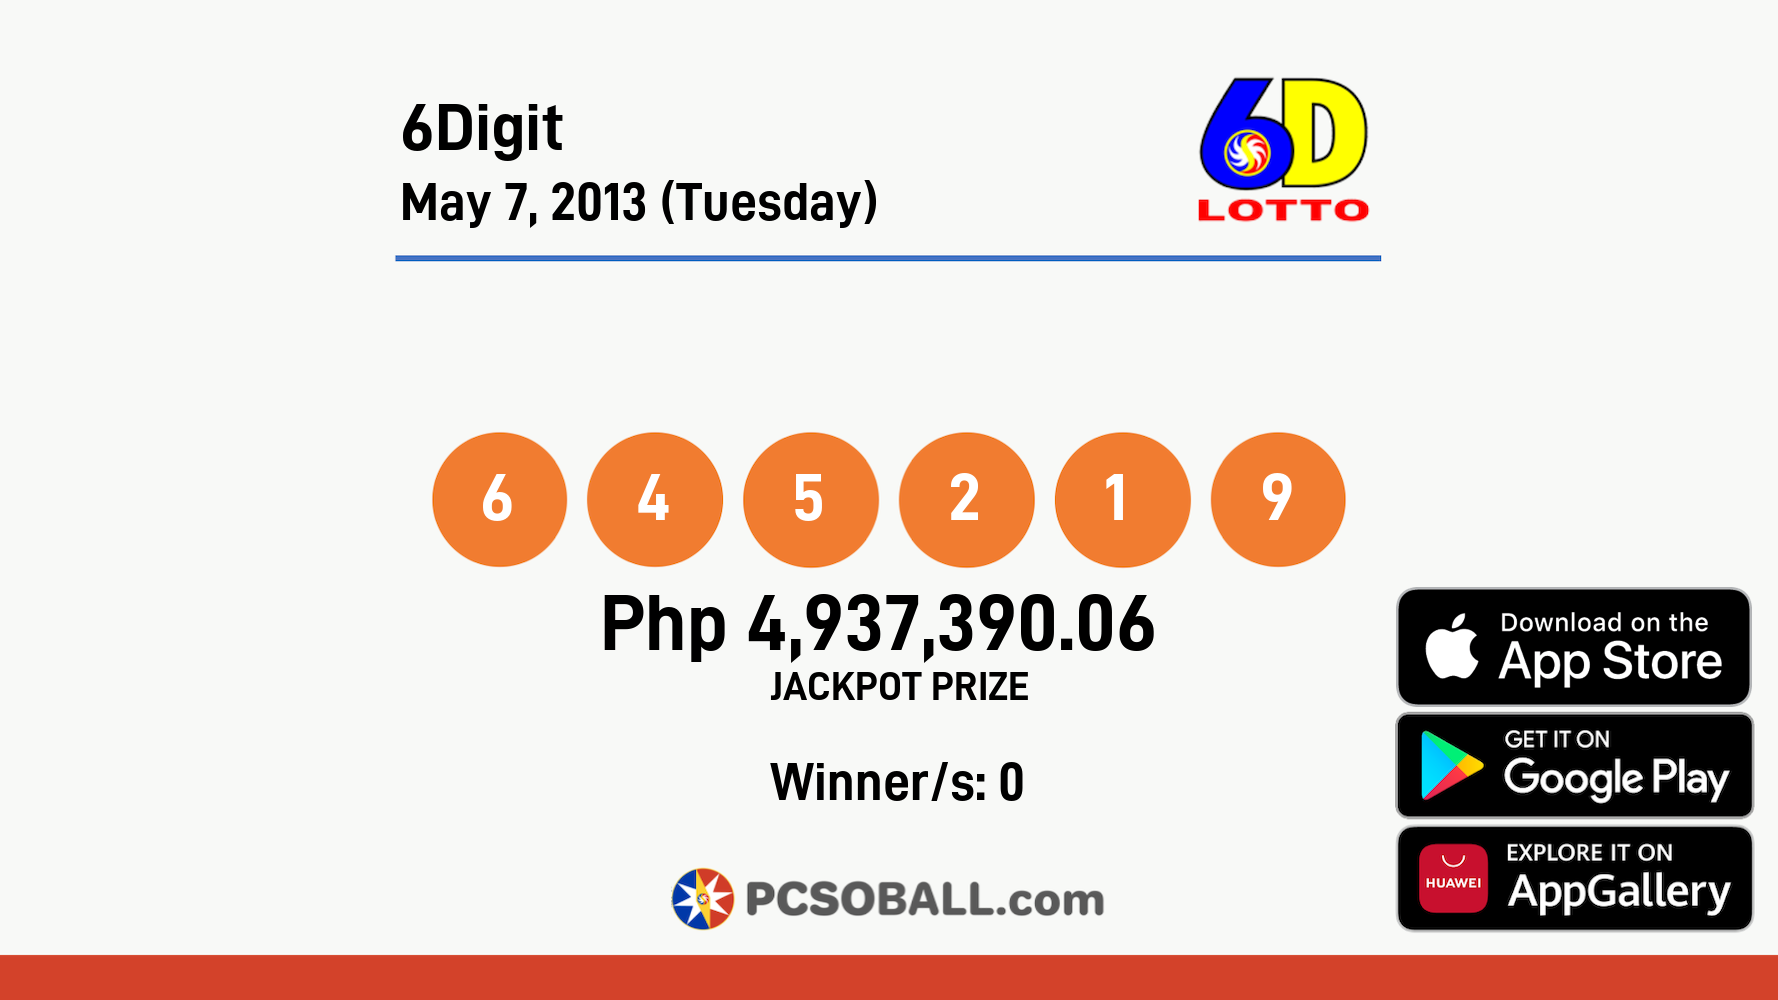 6Digit May 7, 2013 (Tuesday) Result